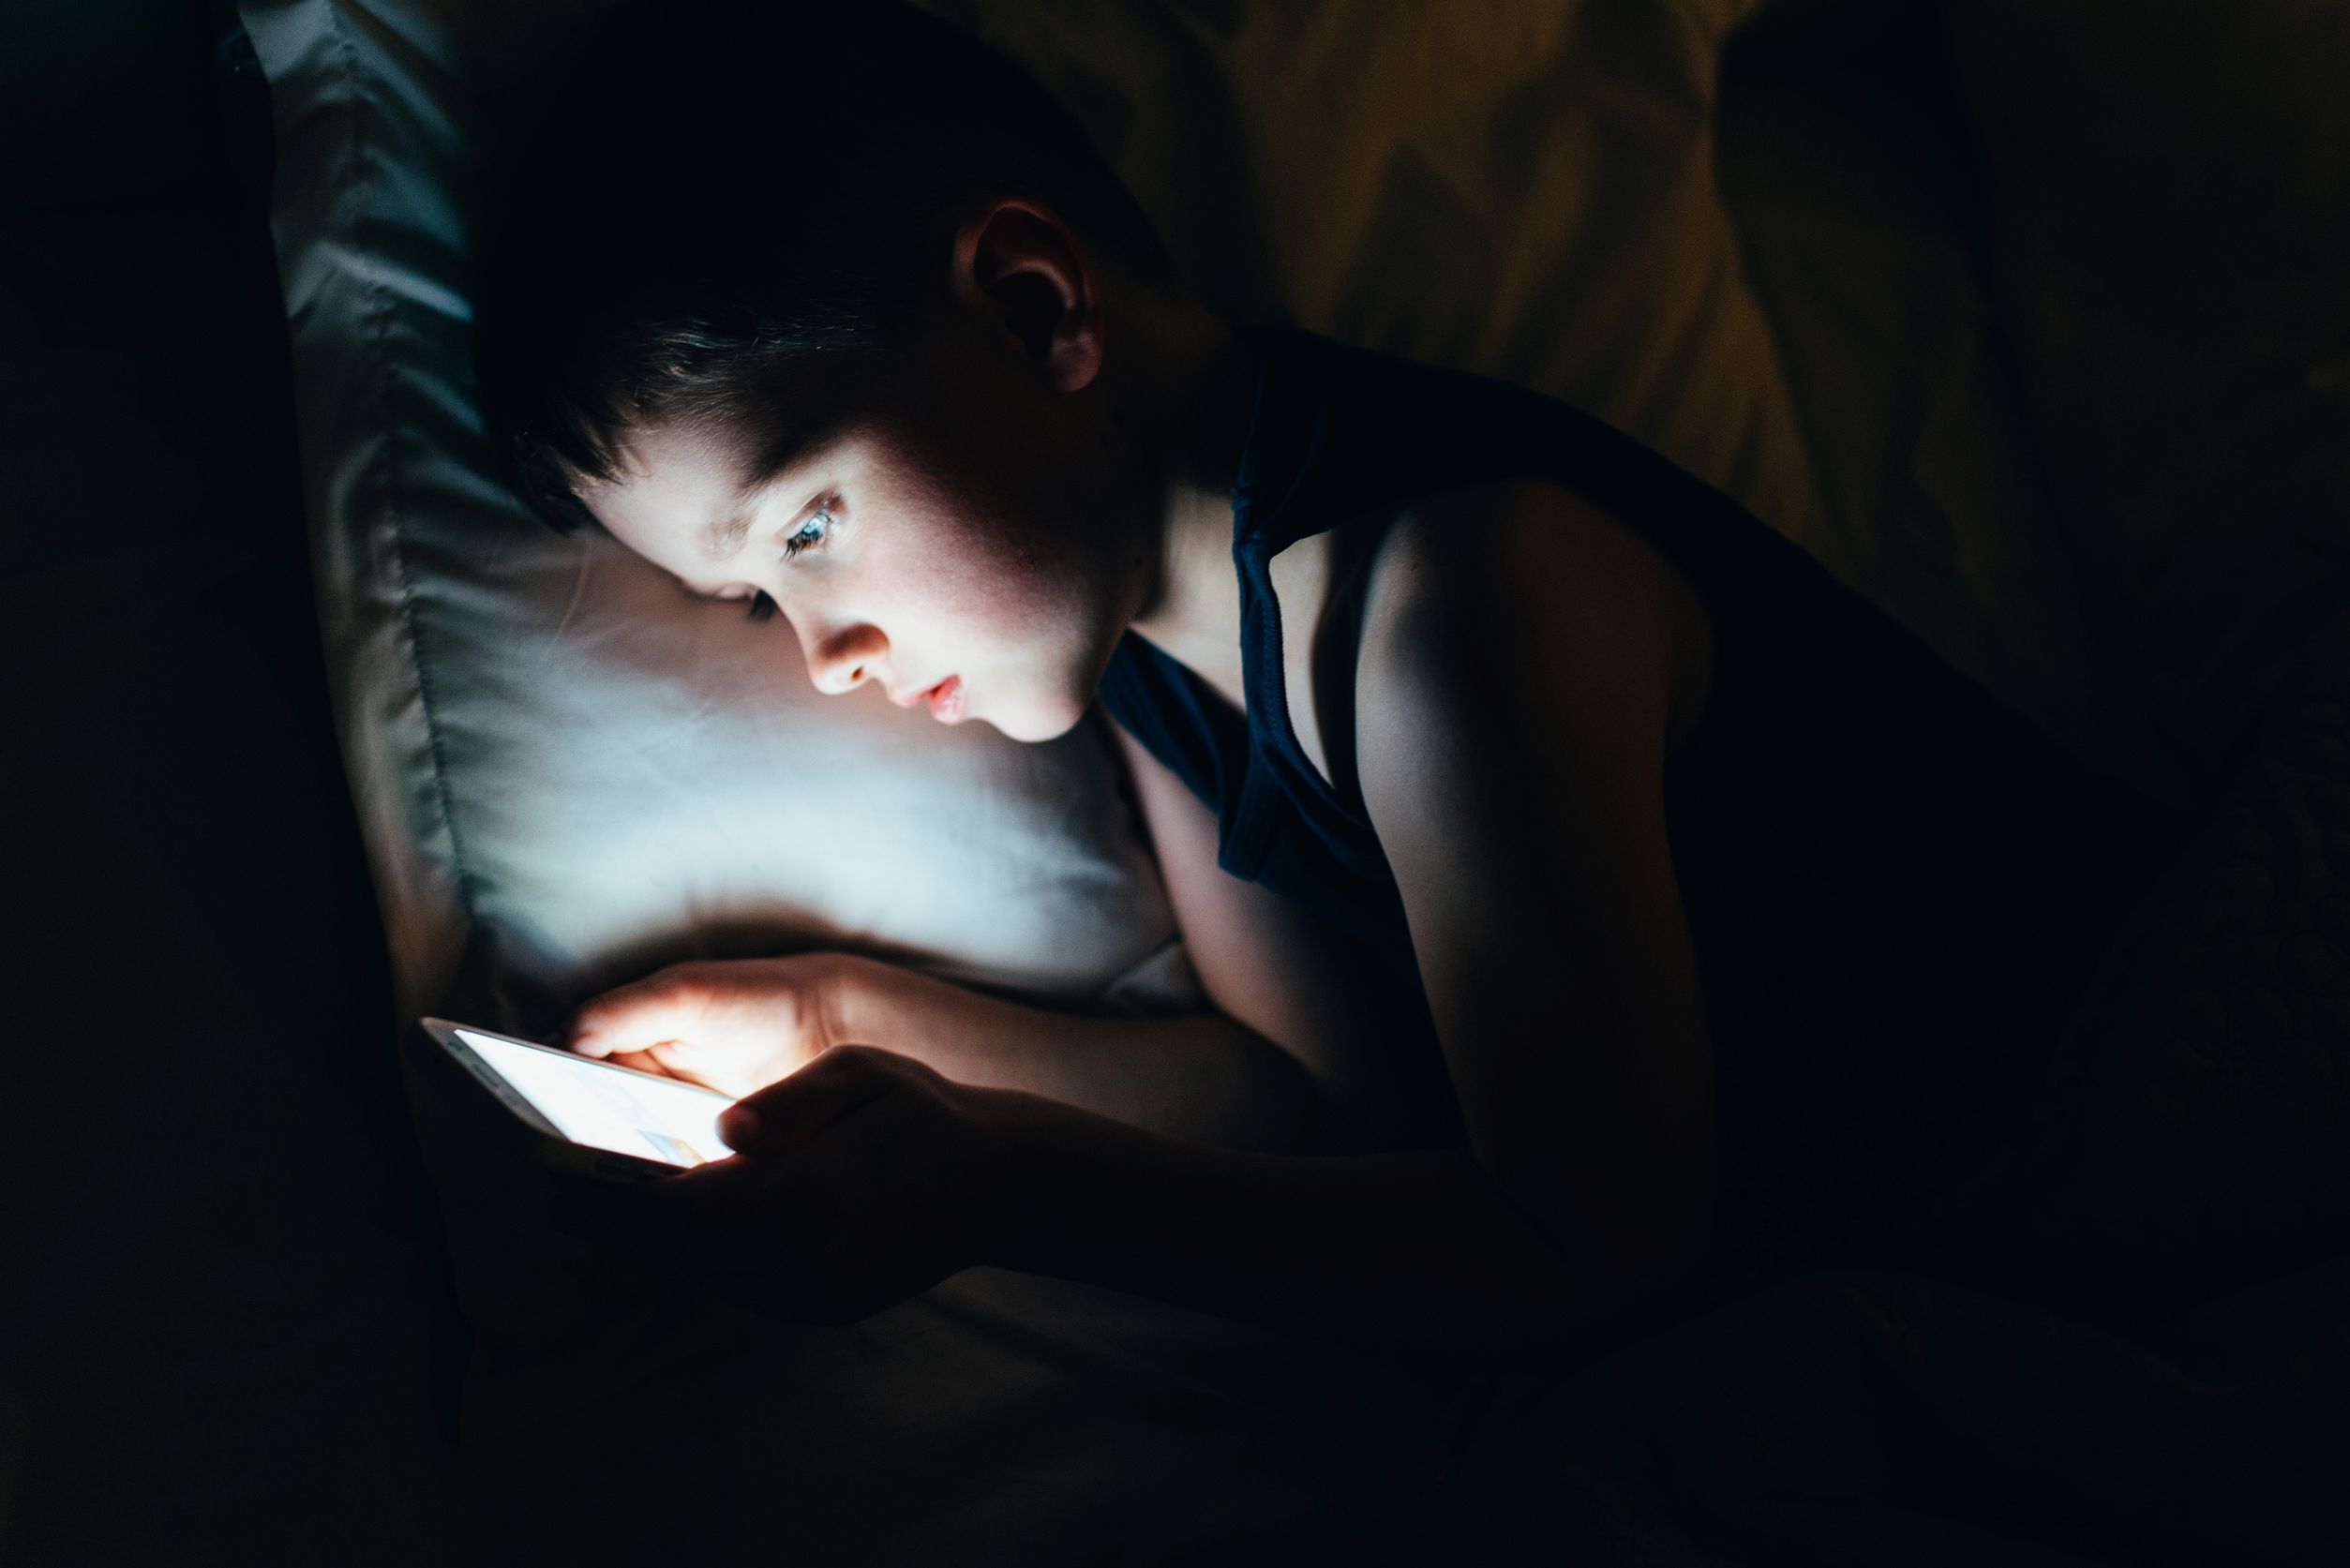 causes of sleep deprivation in children